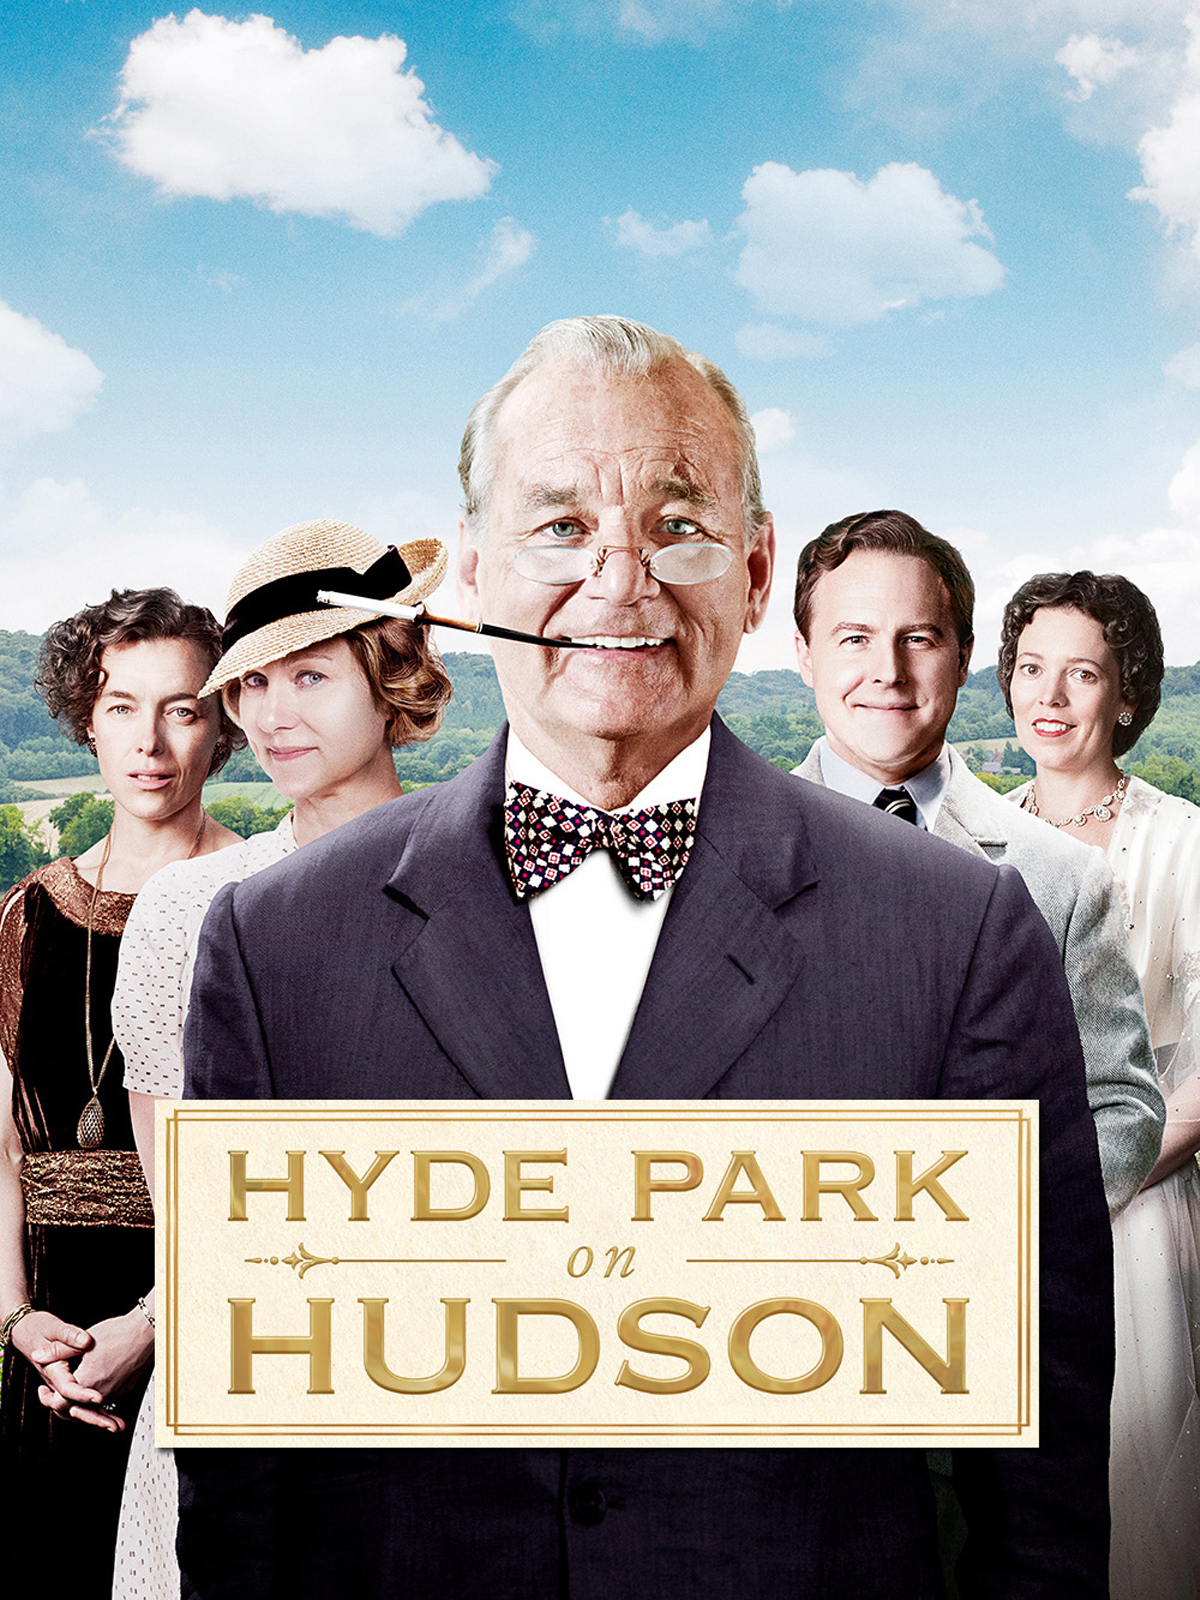 Hyde Park on Hudson poster, featuring Bill Murray standing in suit and bow tie with cigarette in cigarette holder, with one man and three women stood behind him.